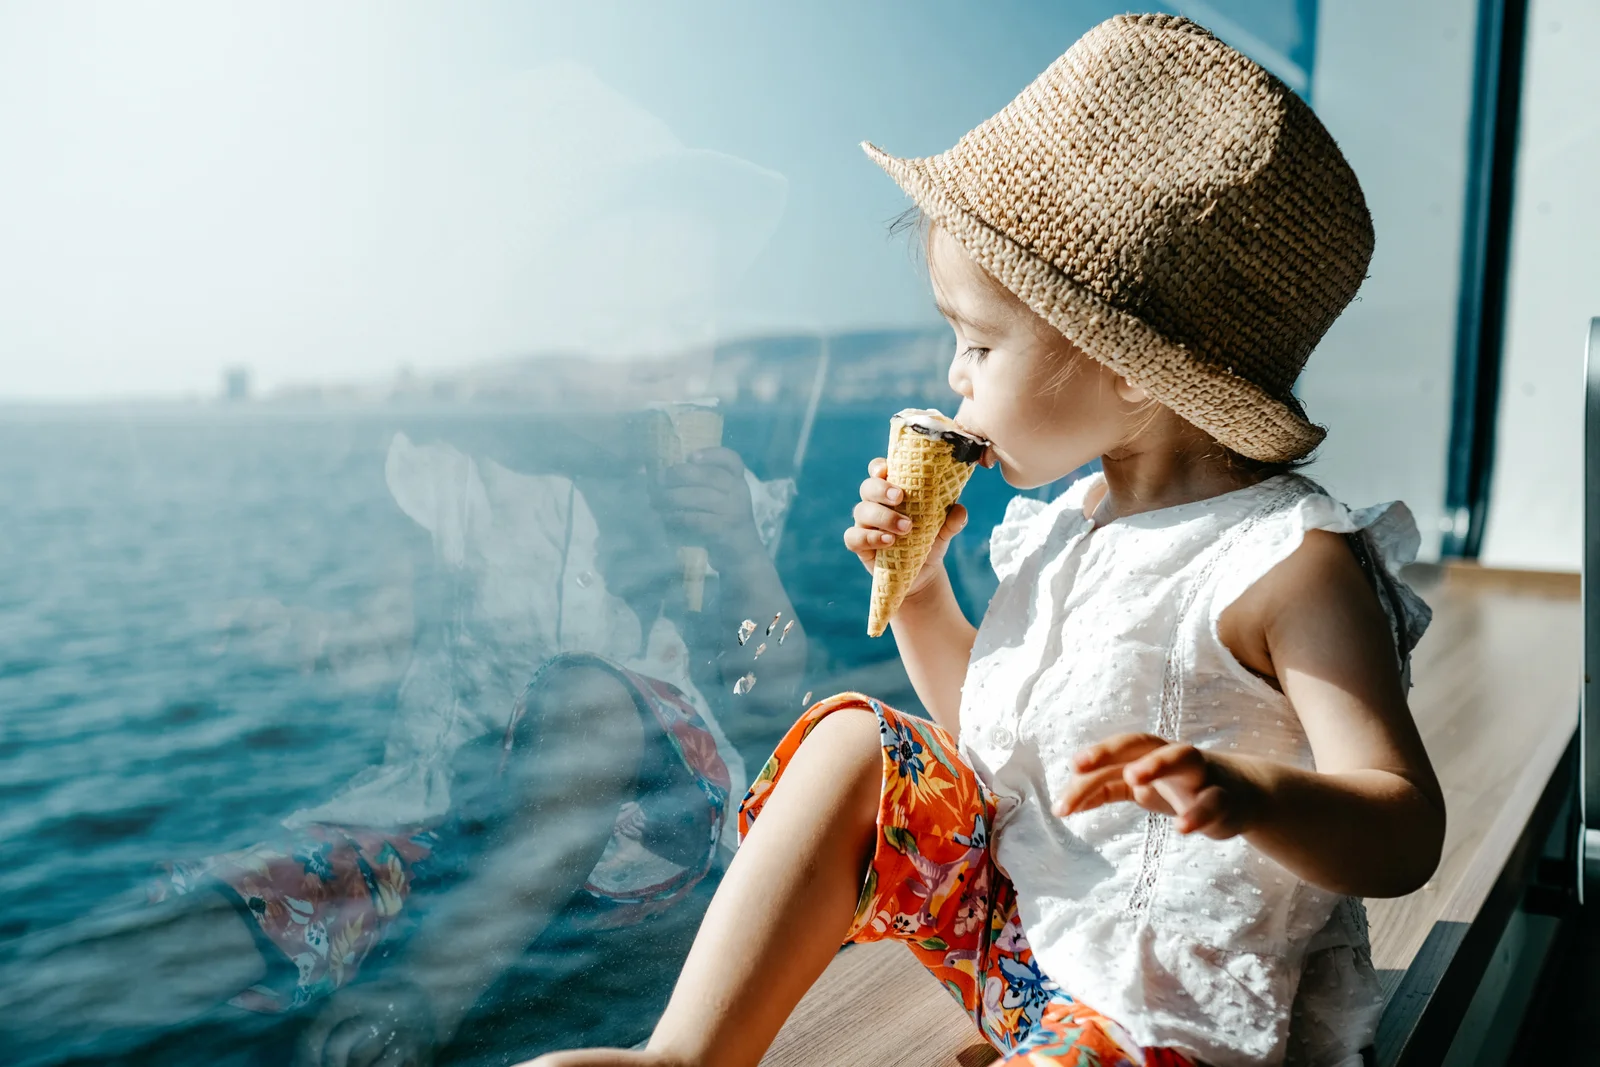 Seven cruise lines will provide free cruises for children in 2023.